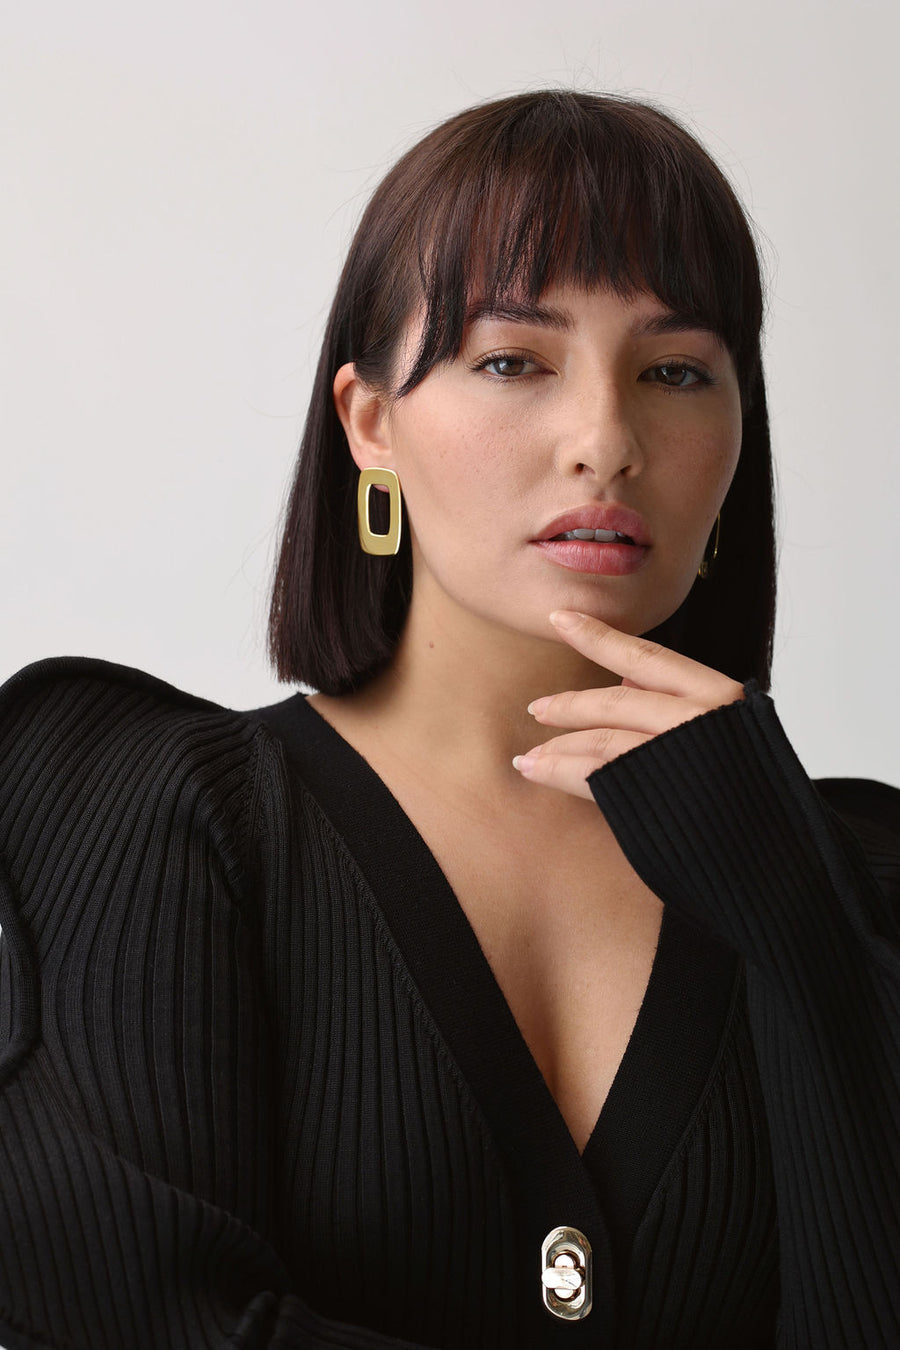 Woman with bob length brown hair and a fringe, wearing bold gold earrings, a black knit top, looking directly into the camera, touching her left finger to her chin